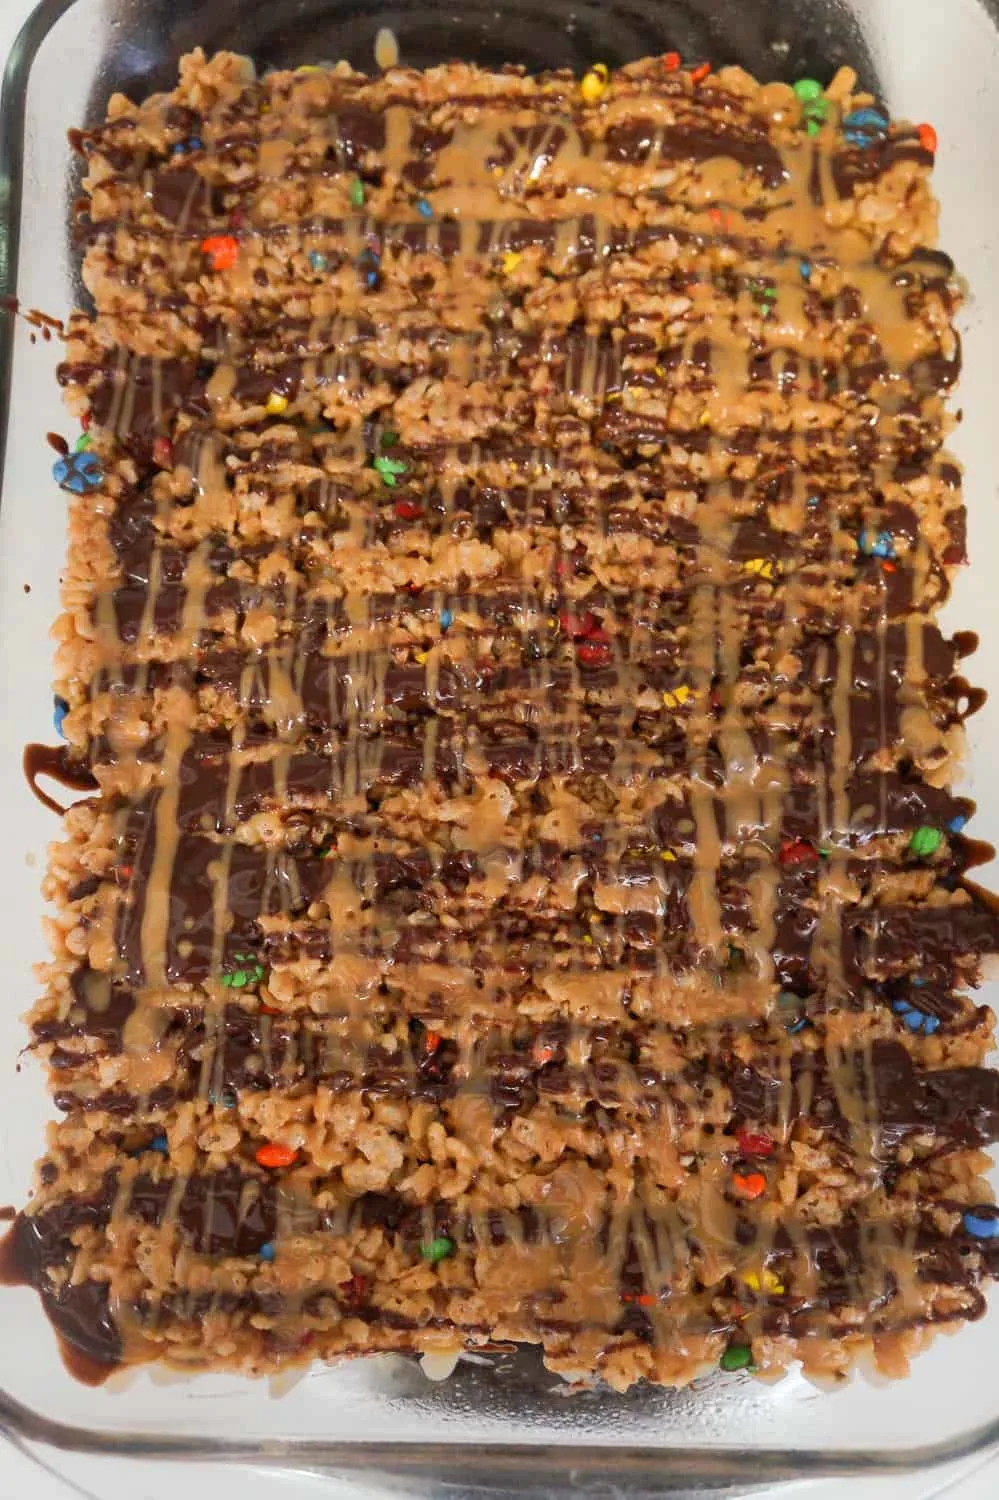 melted peanut butter and chocolate drizzled over rice krispie treats